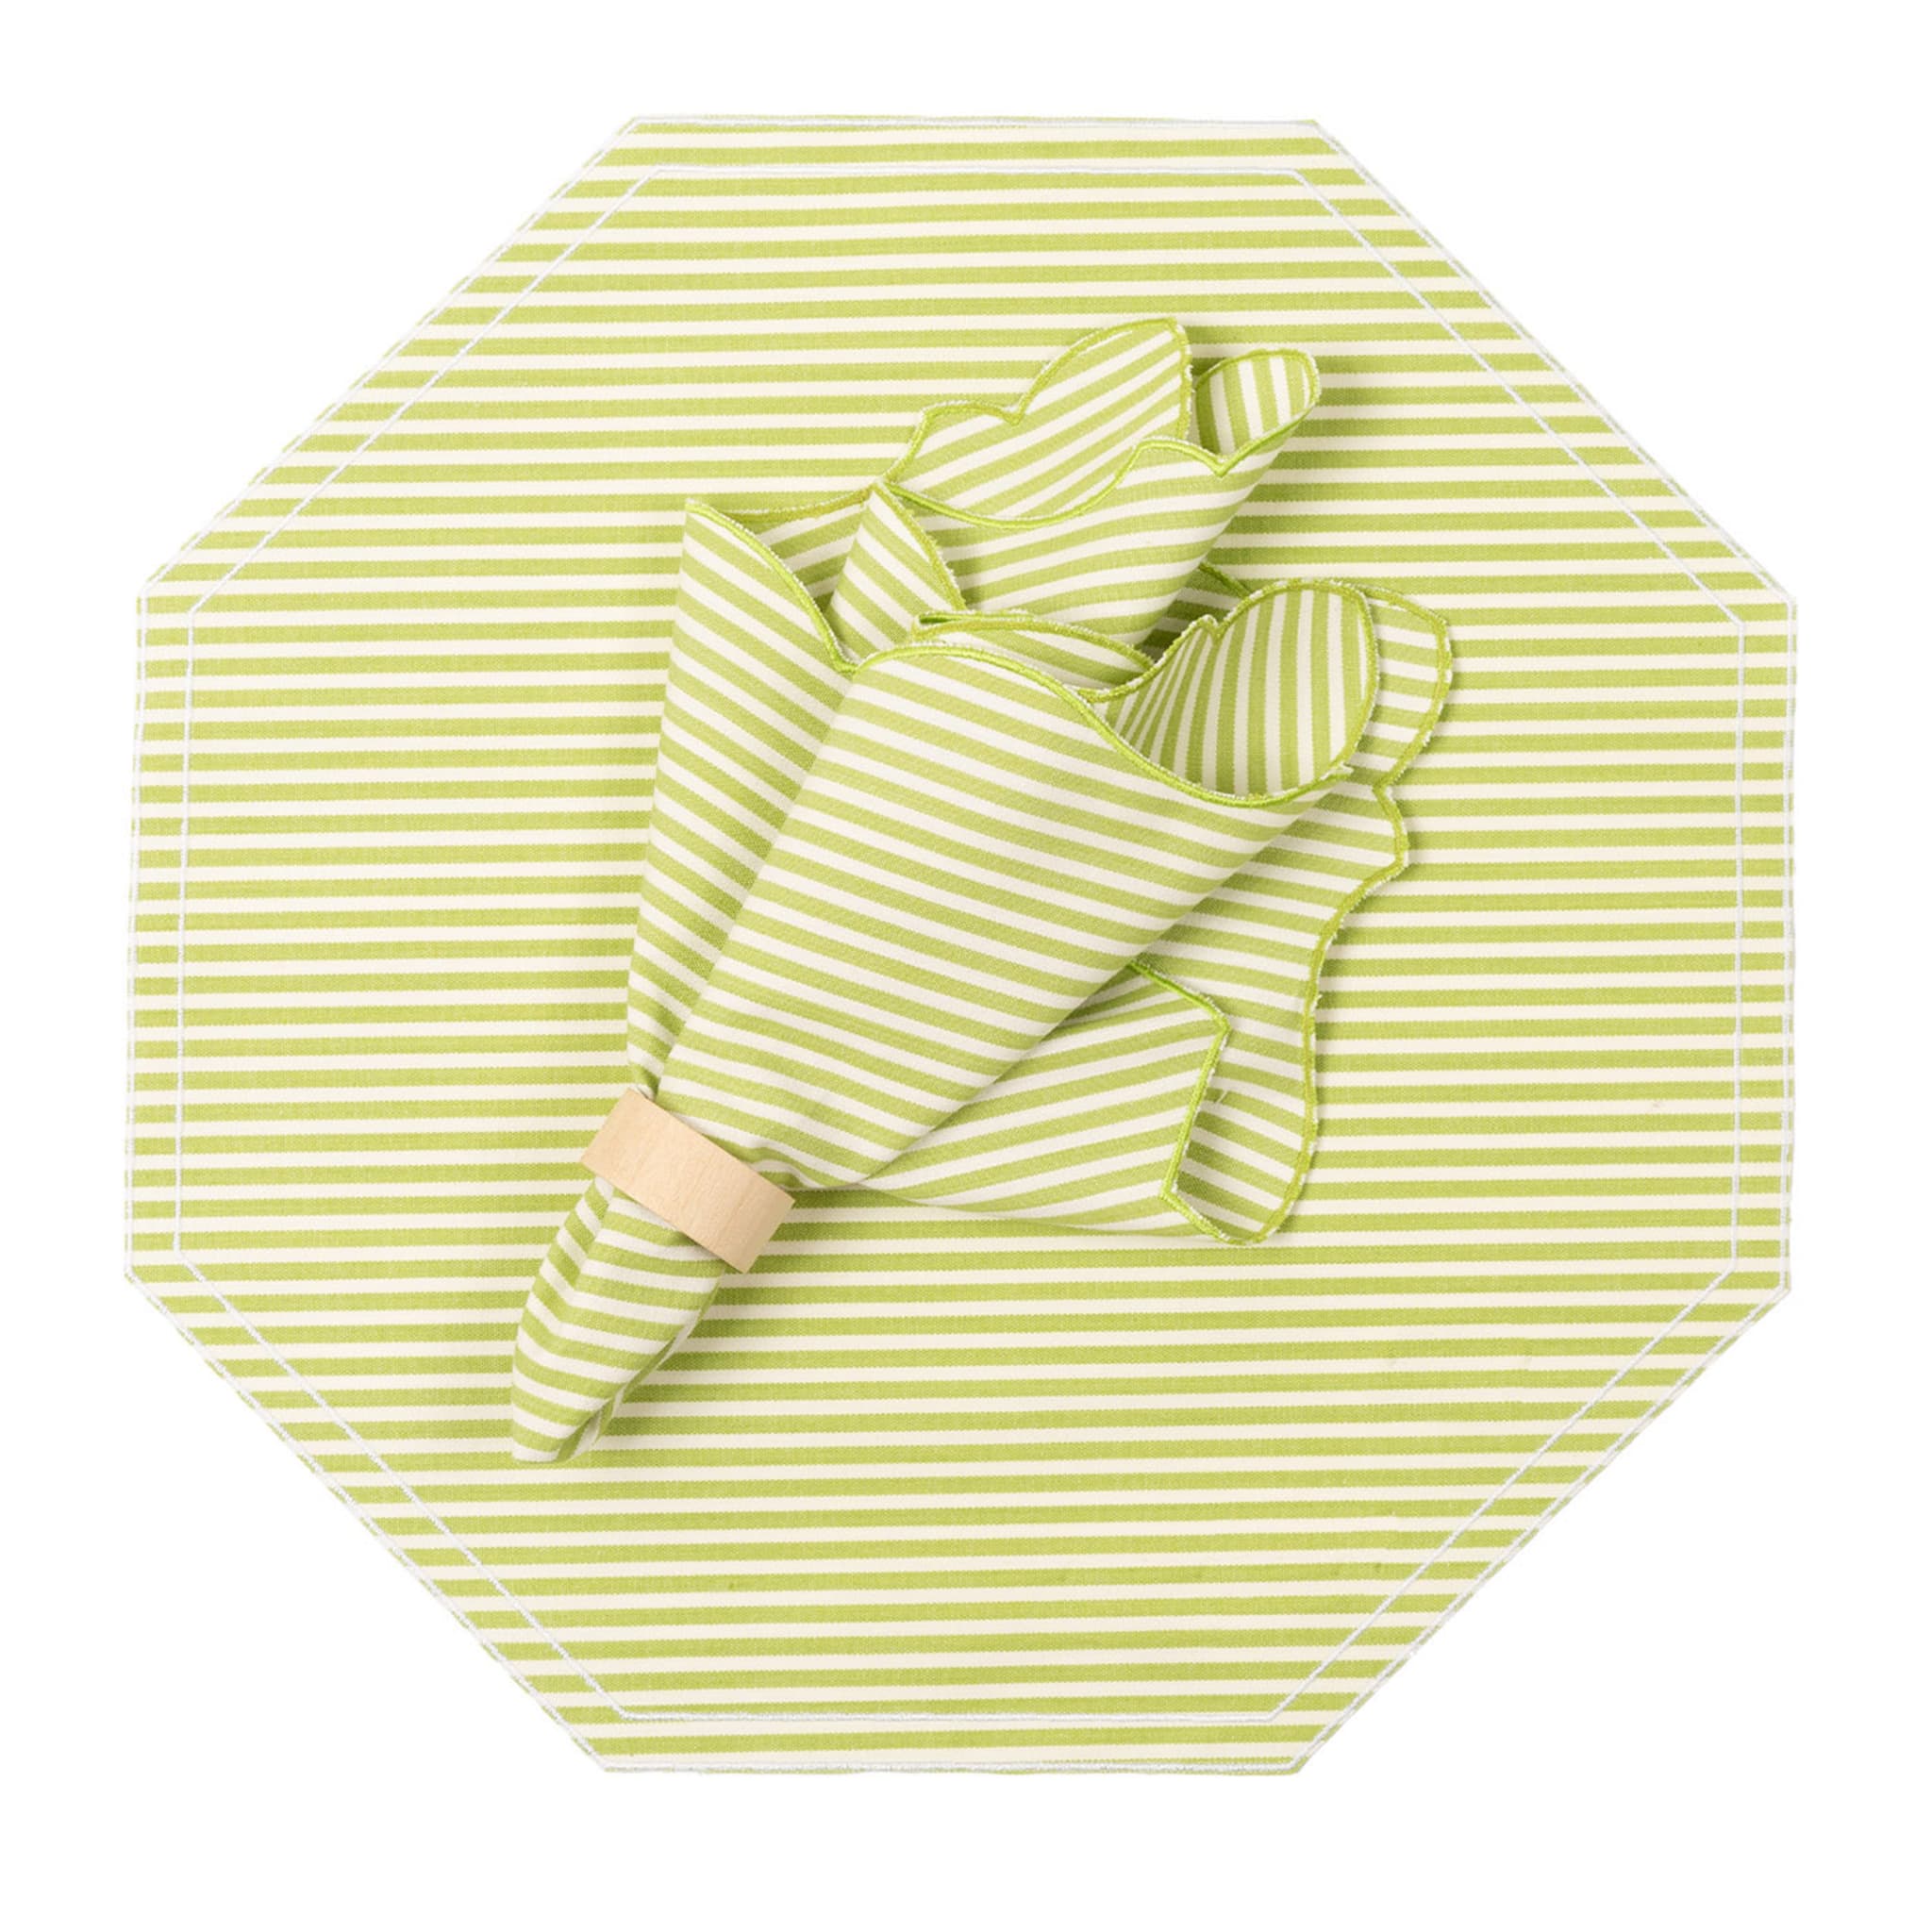 Mr Stripes Green Octagon Placemat & Angelina Napkin #2 - Main view